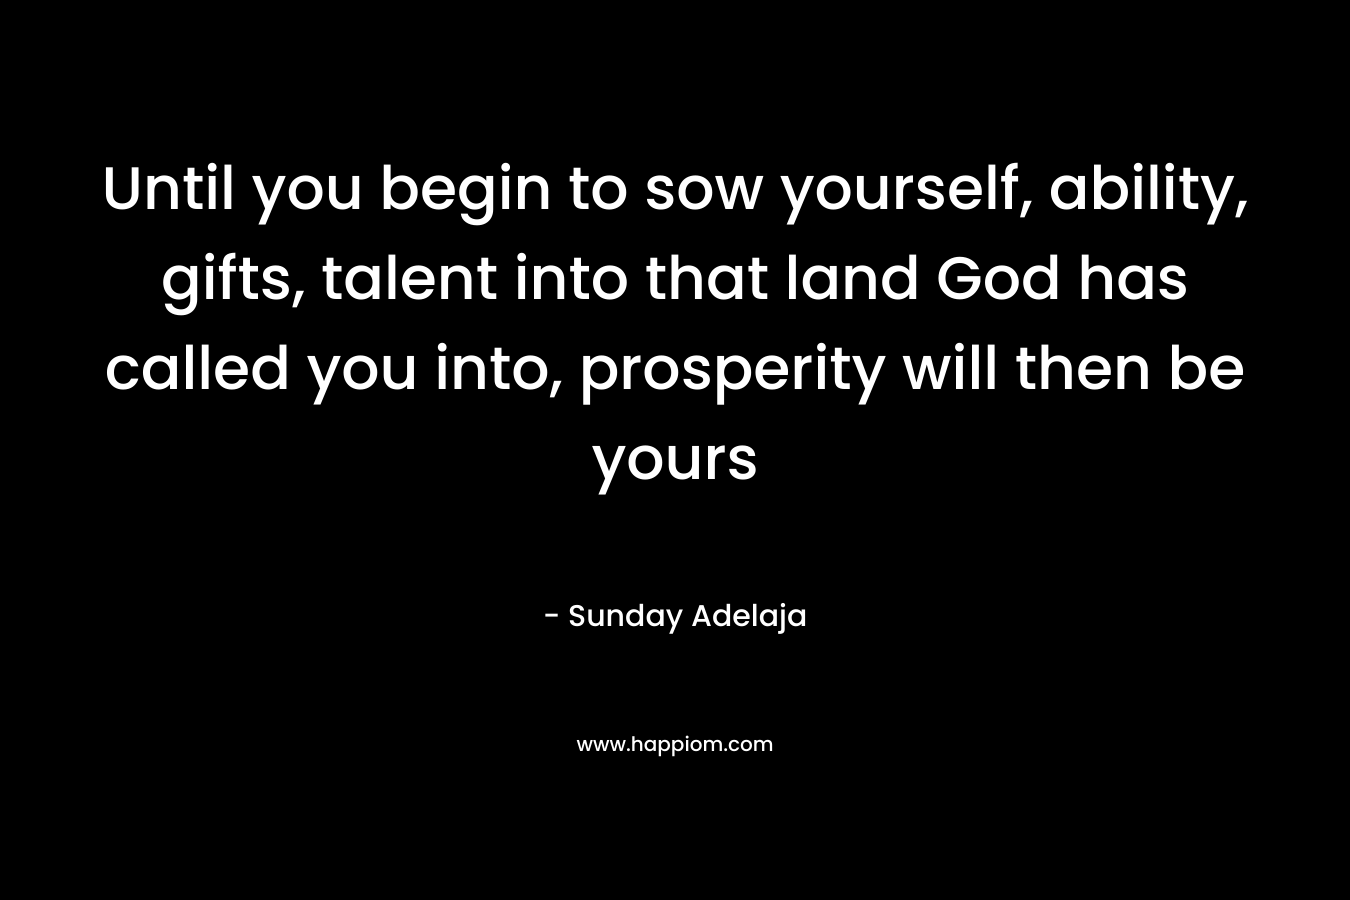 Until you begin to sow yourself, ability, gifts, talent into that land God has called you into, prosperity will then be yours – Sunday Adelaja